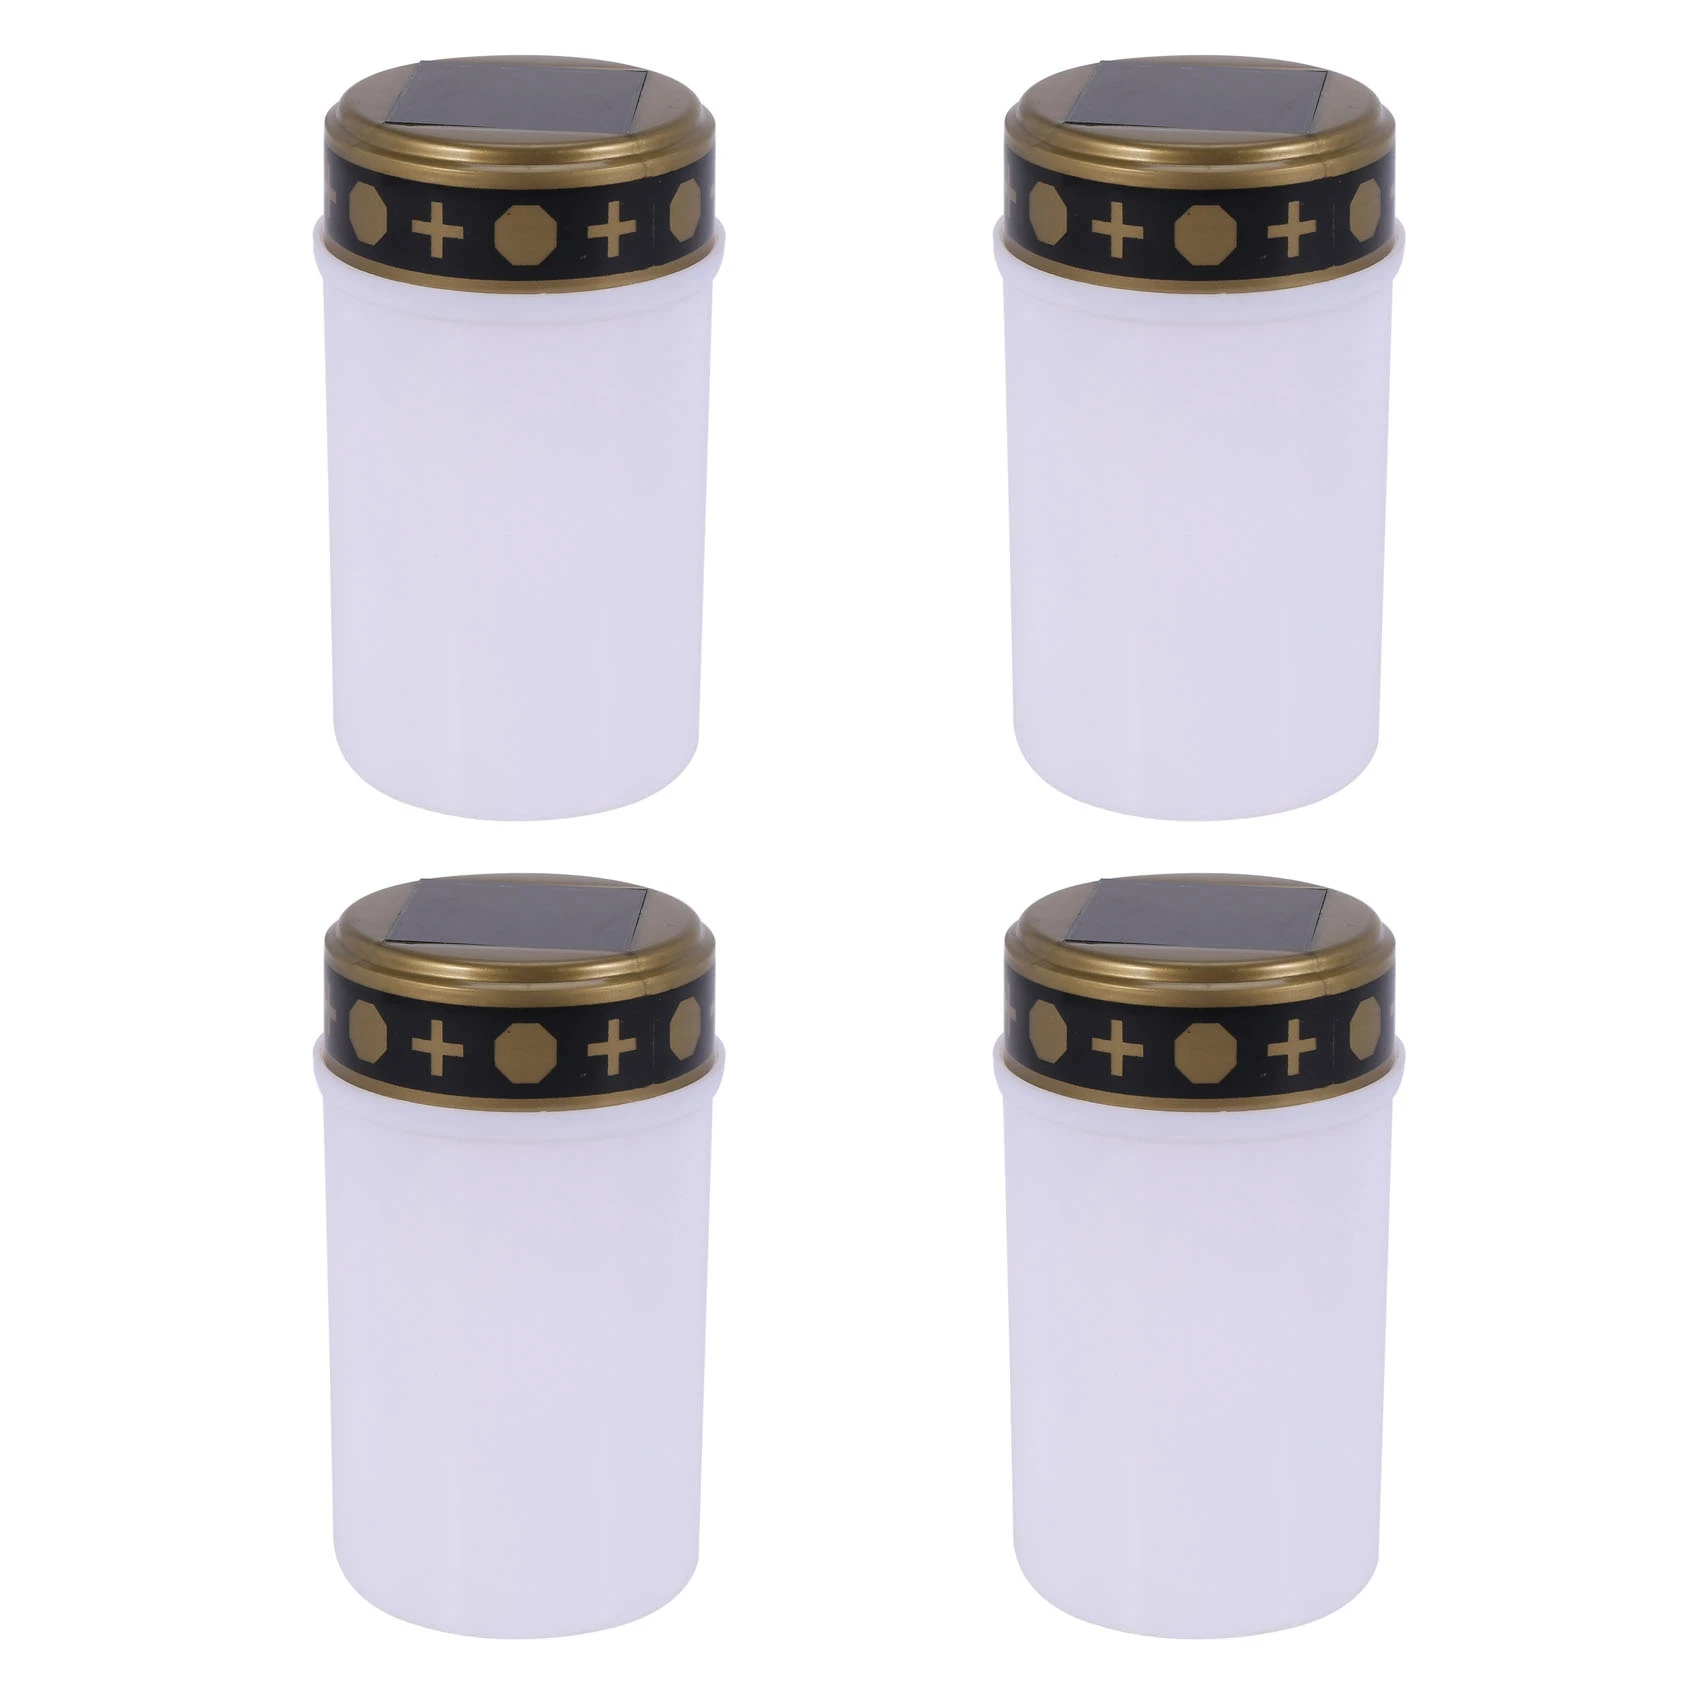 

4X White Grave Candle for Cemetery Grave Solar Lights with Lighting LED Grave Light 1Pcs